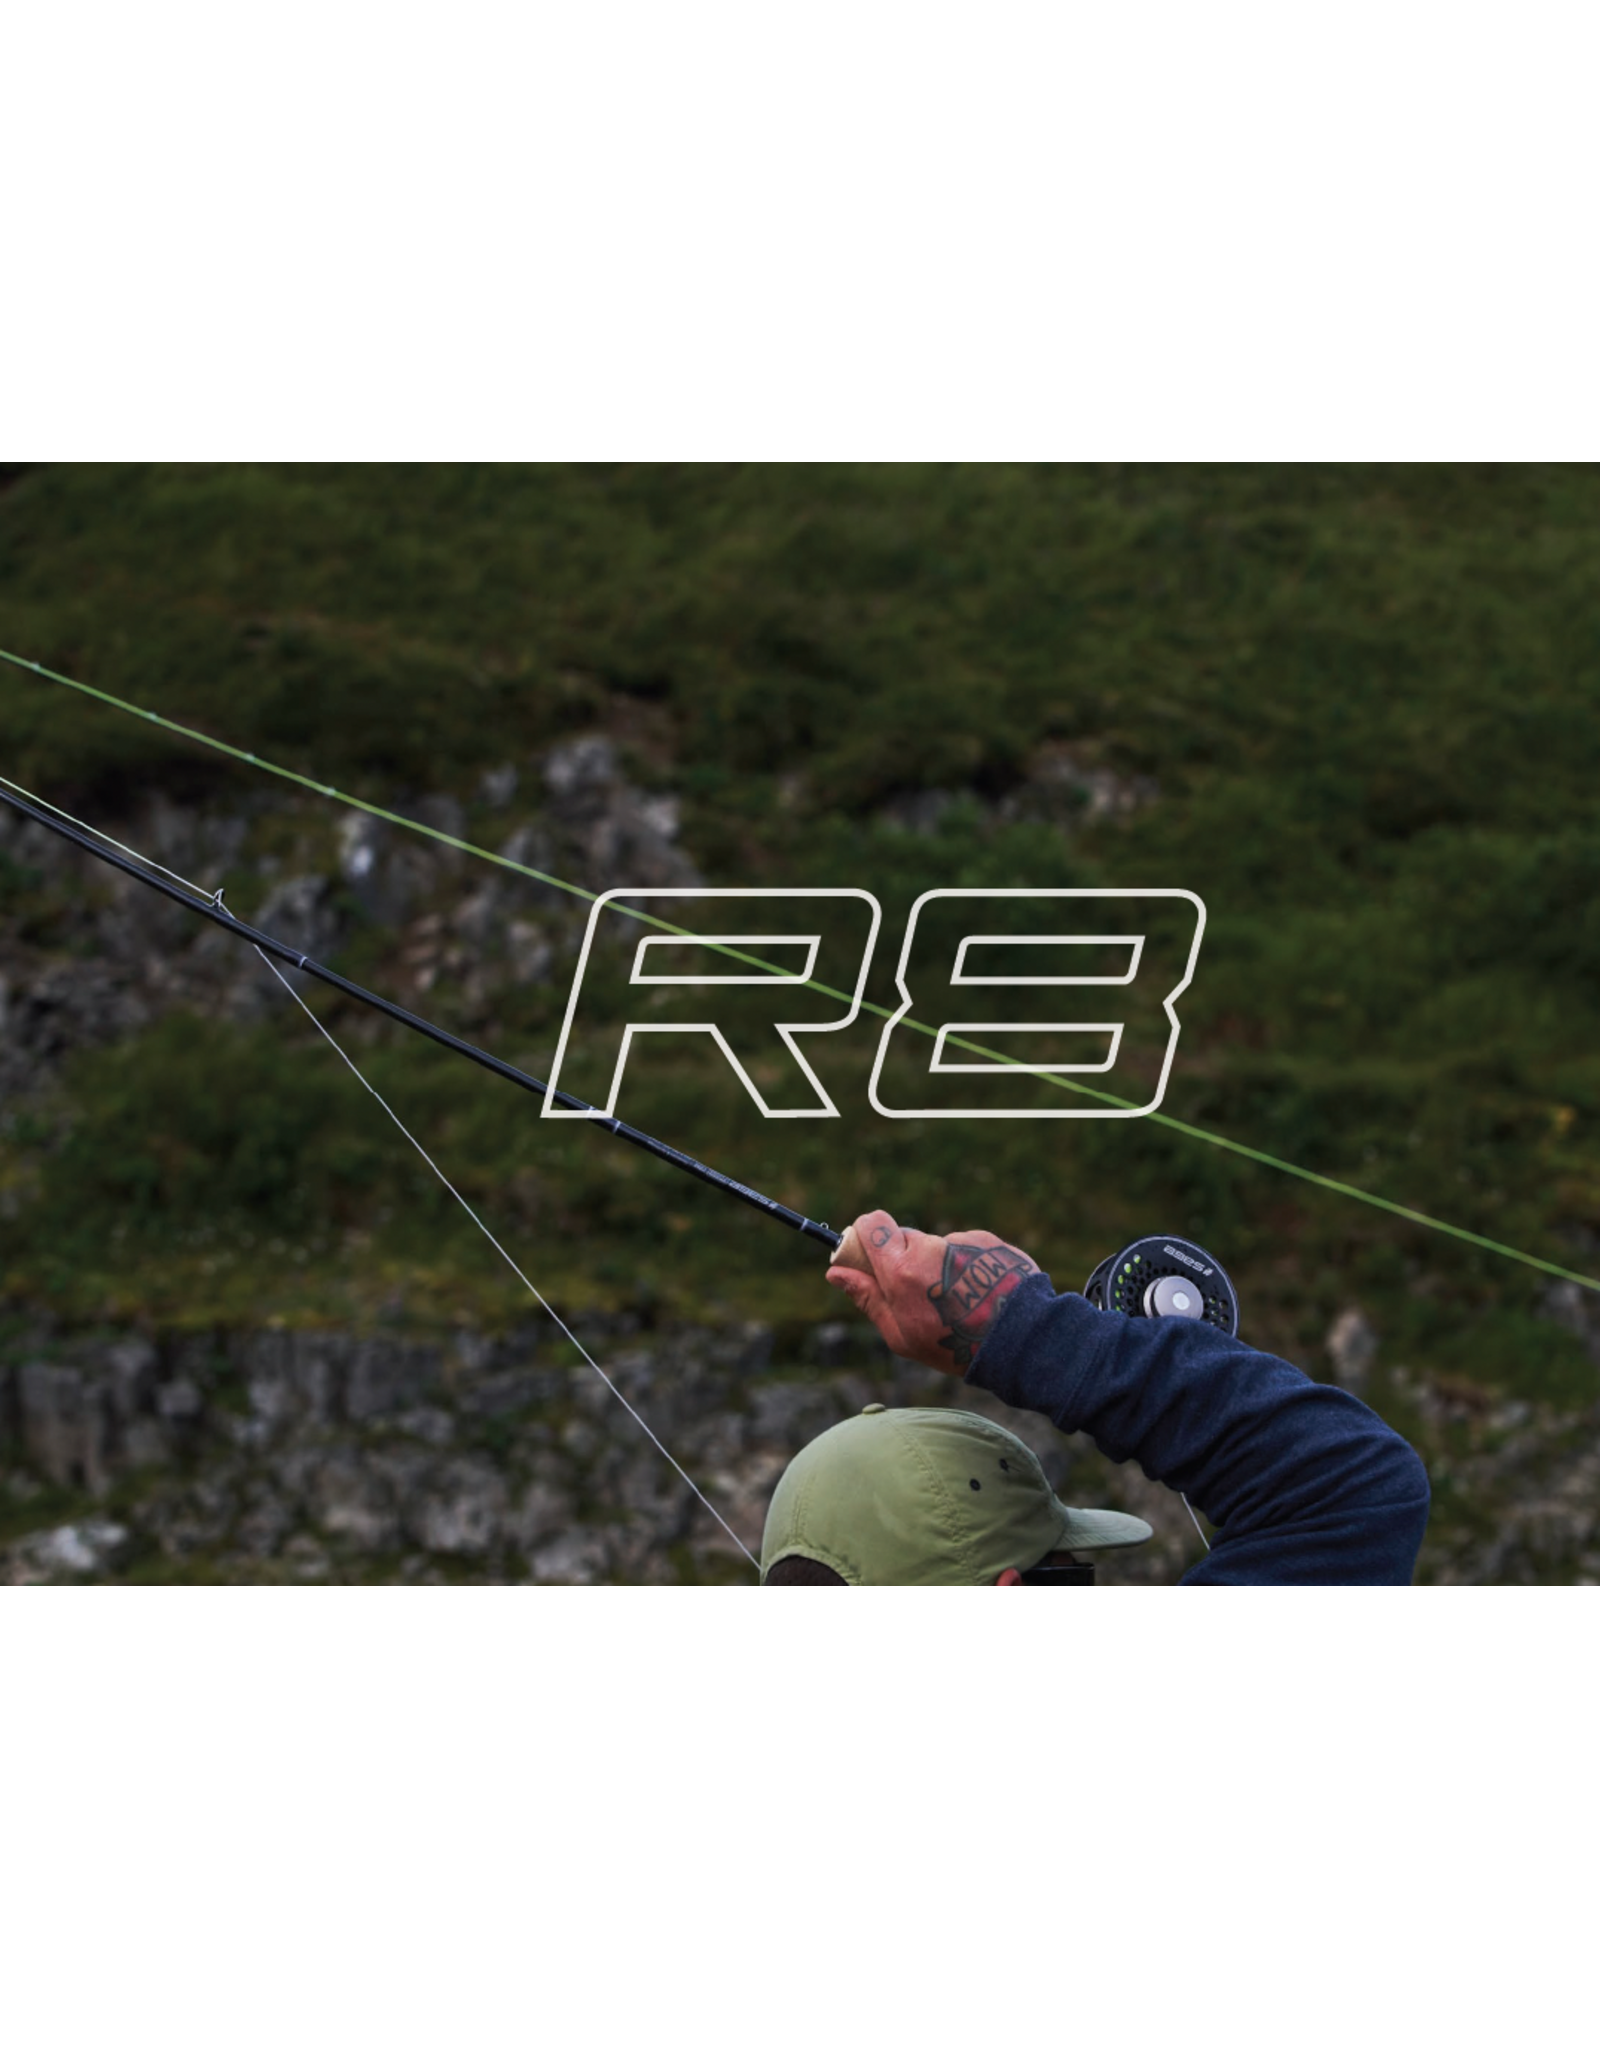 Sage R8 Fly Rods - Sage Fly Rods